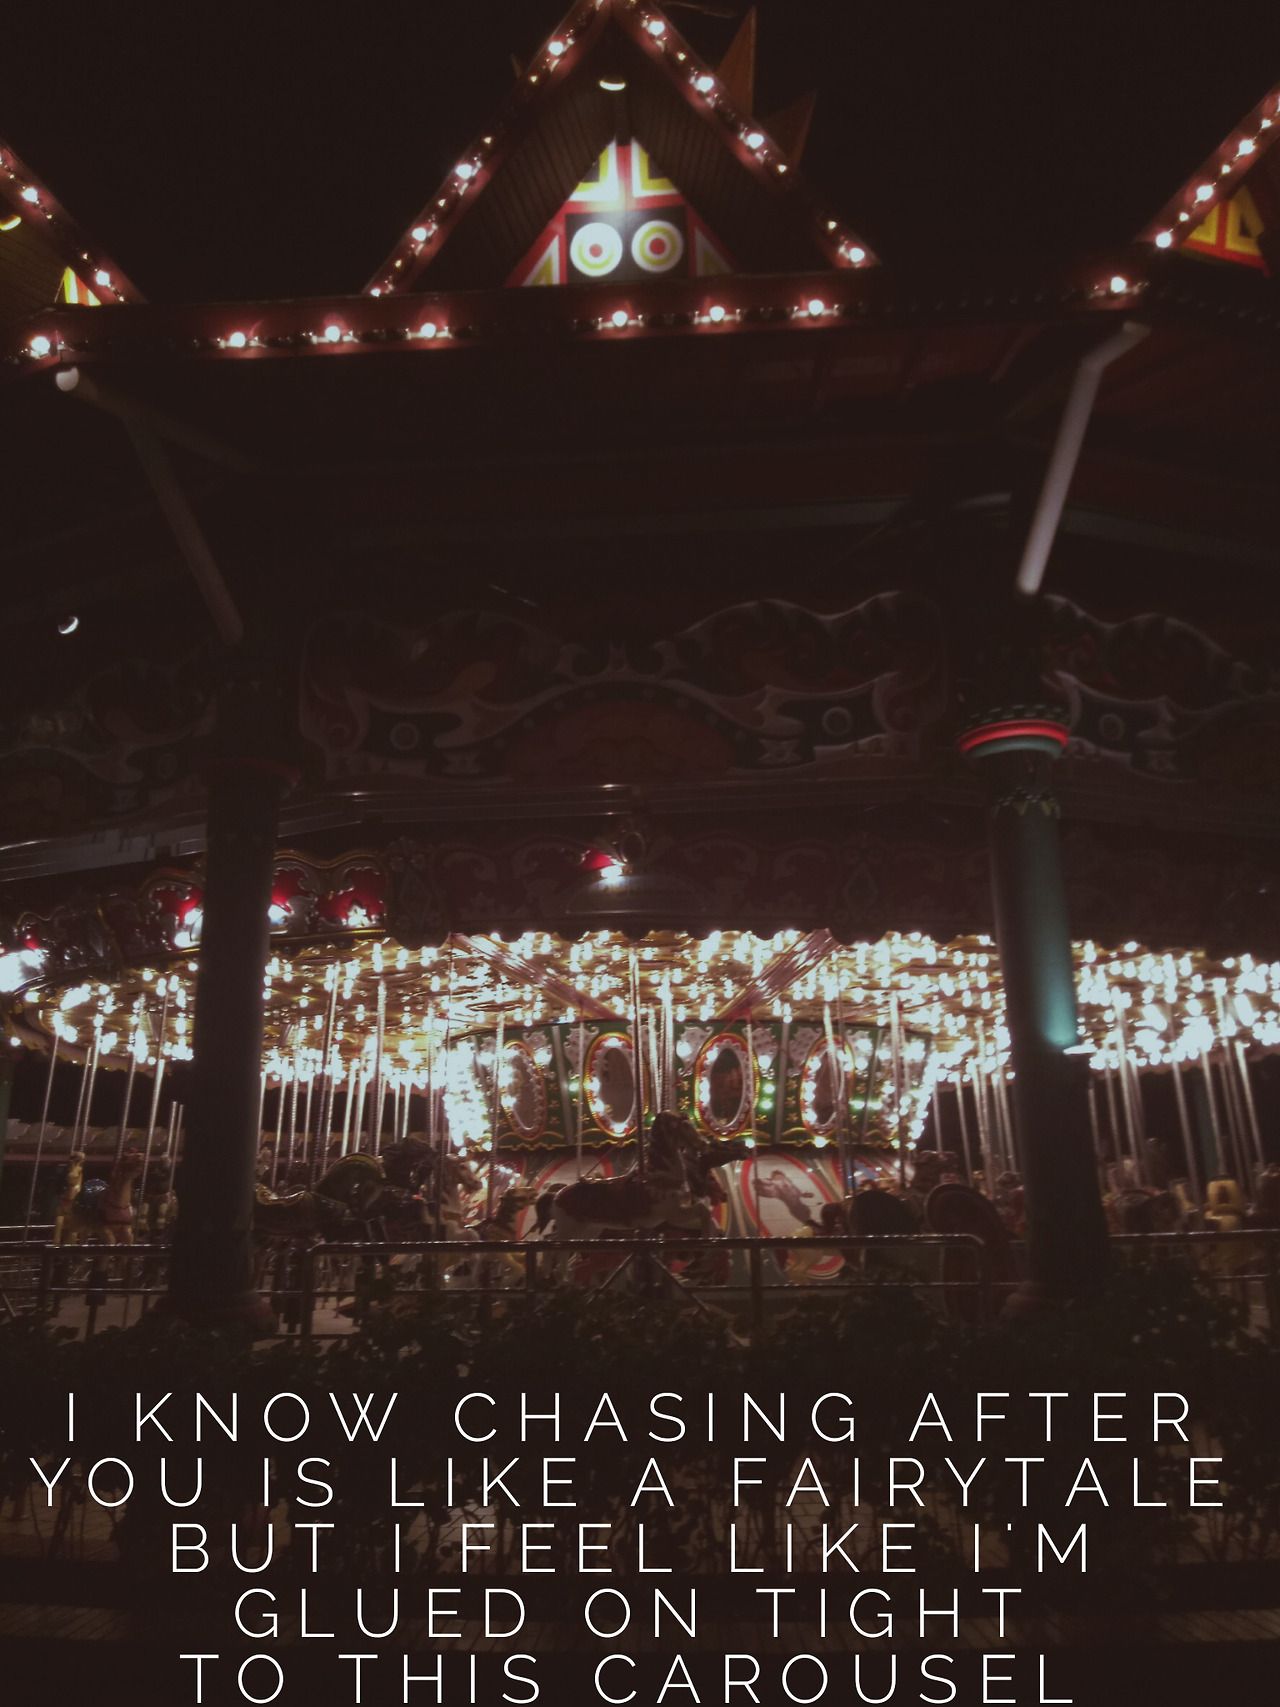 A carousel with lights on it at night - Melanie Martinez